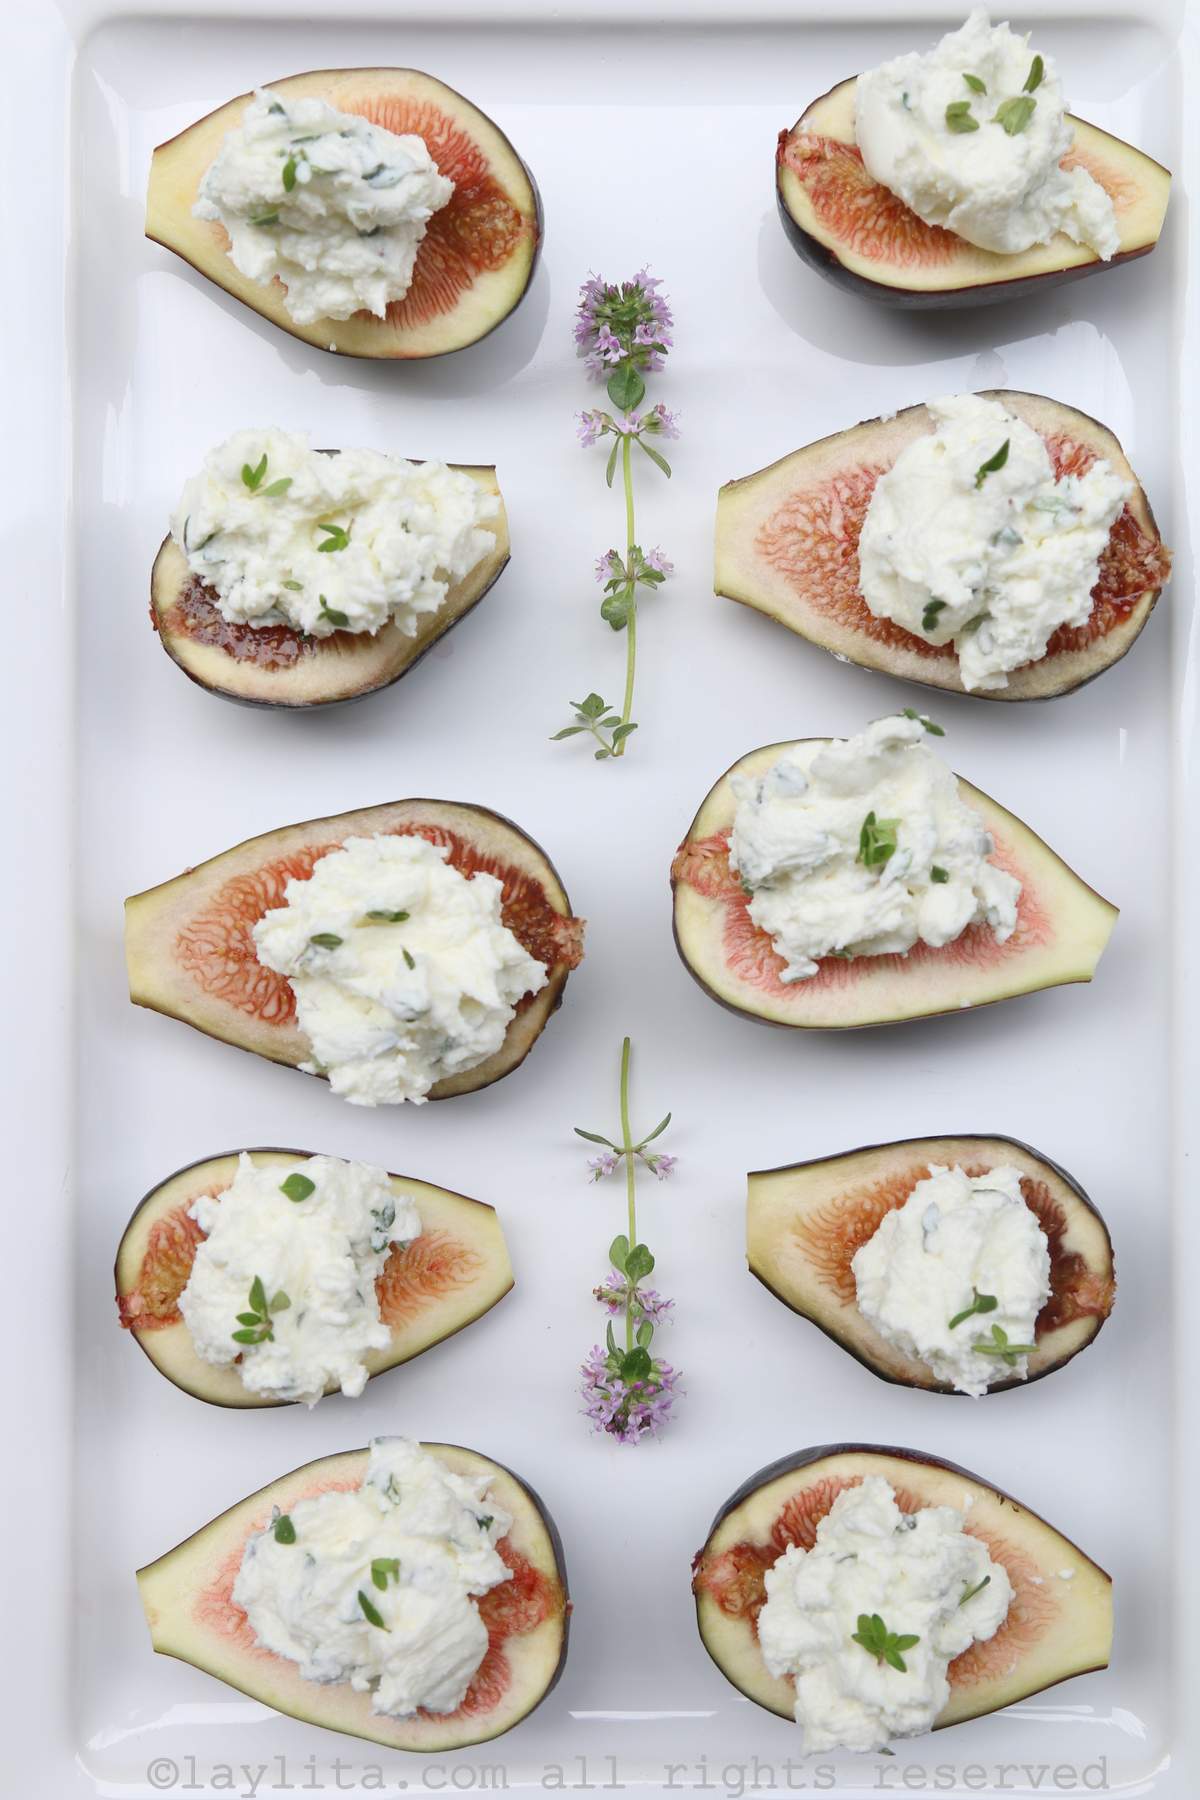 Figs with herbed garlic goat cheese